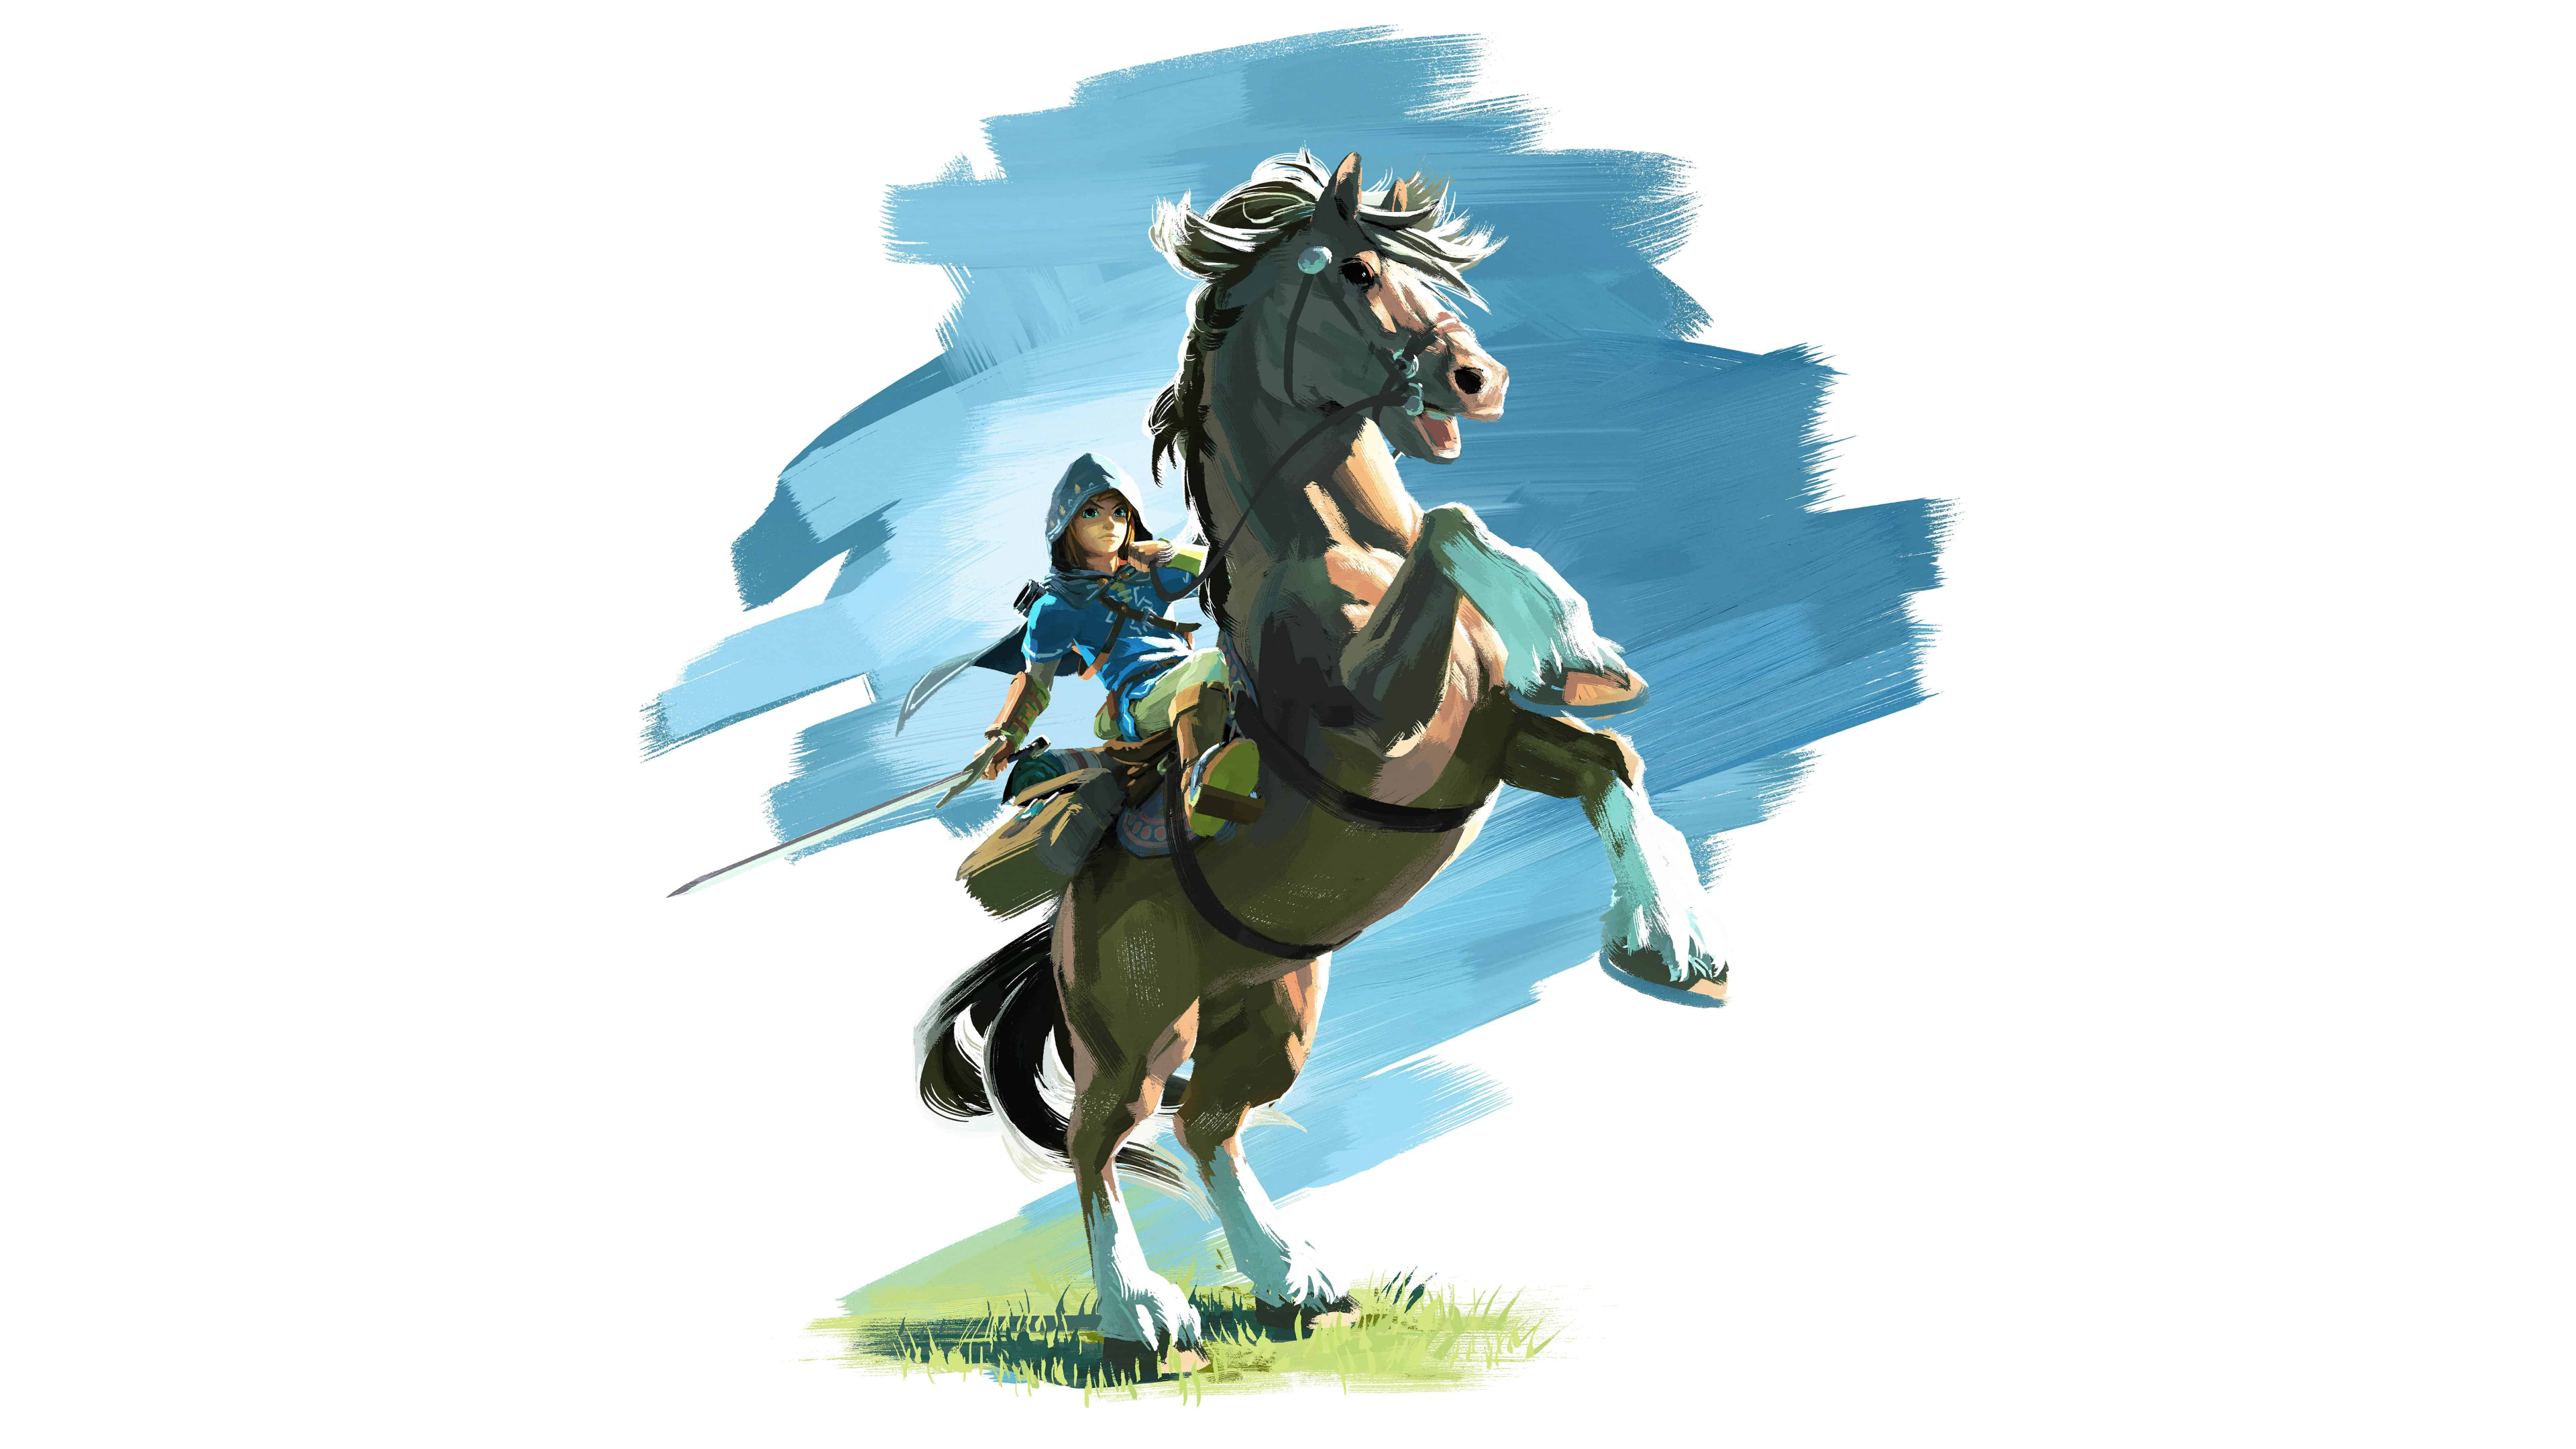 Woman in Blue Dress Riding White Horse Illustration. Wallpaper in 3840x2160 Resolution